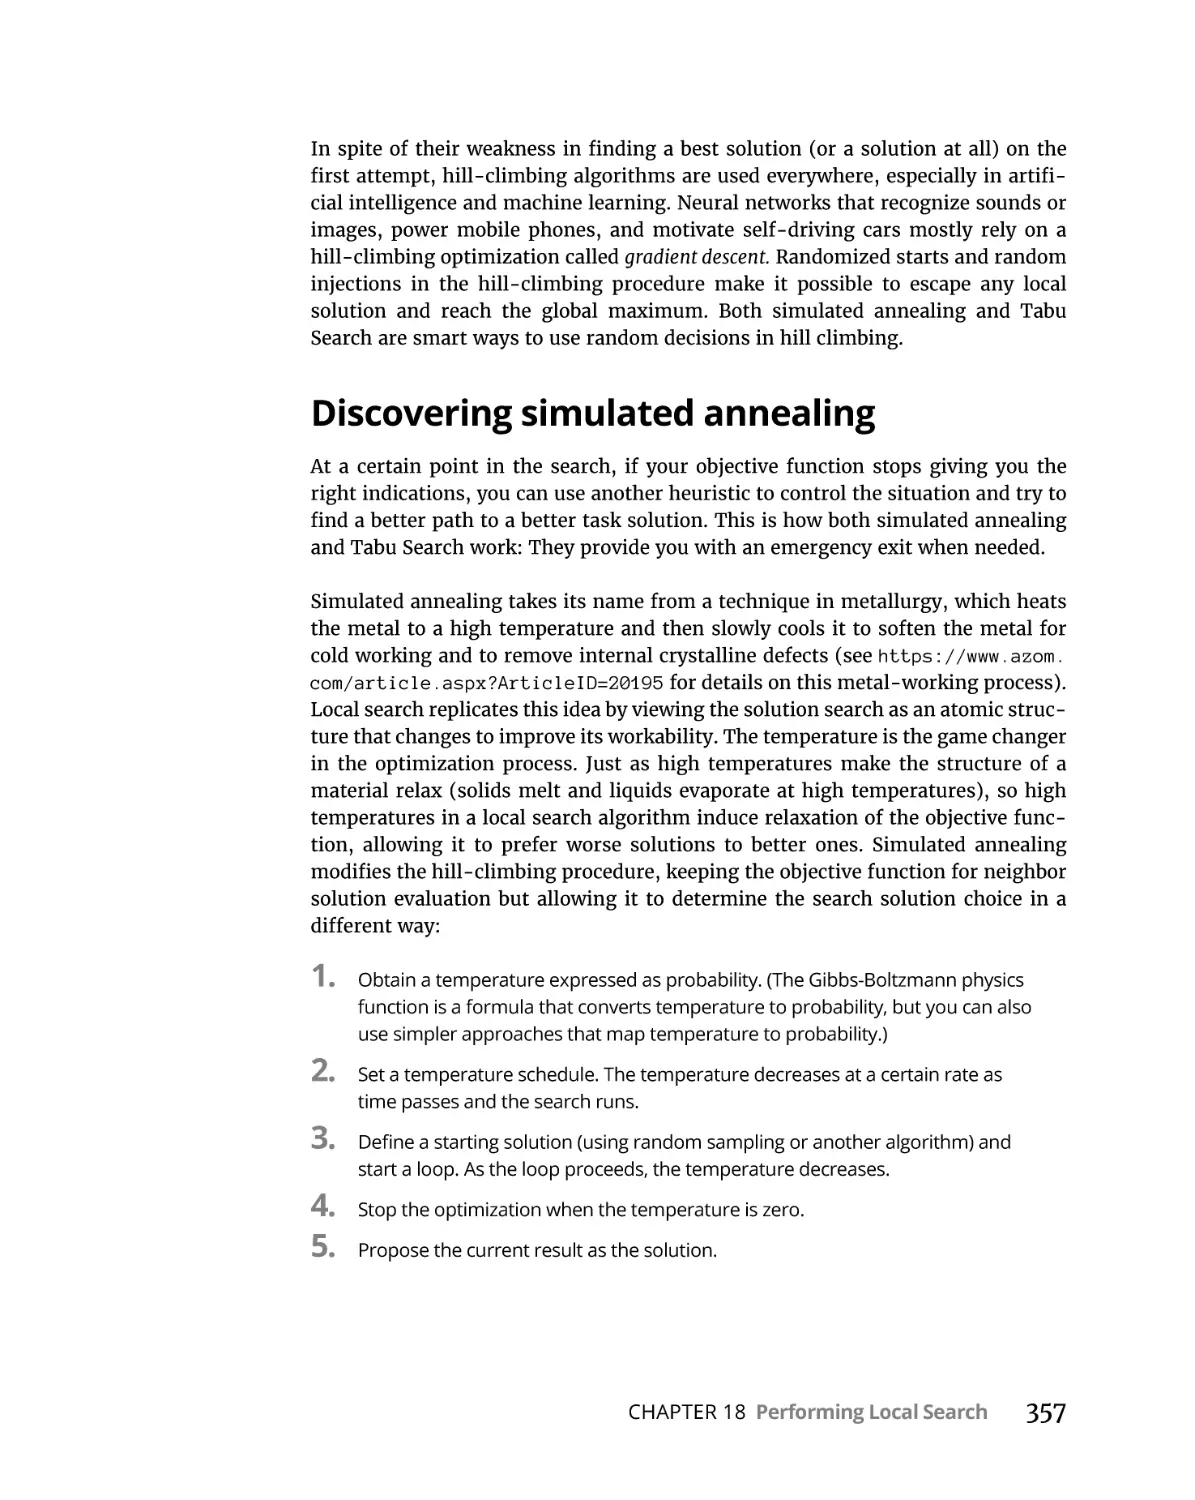 Discovering simulated annealing